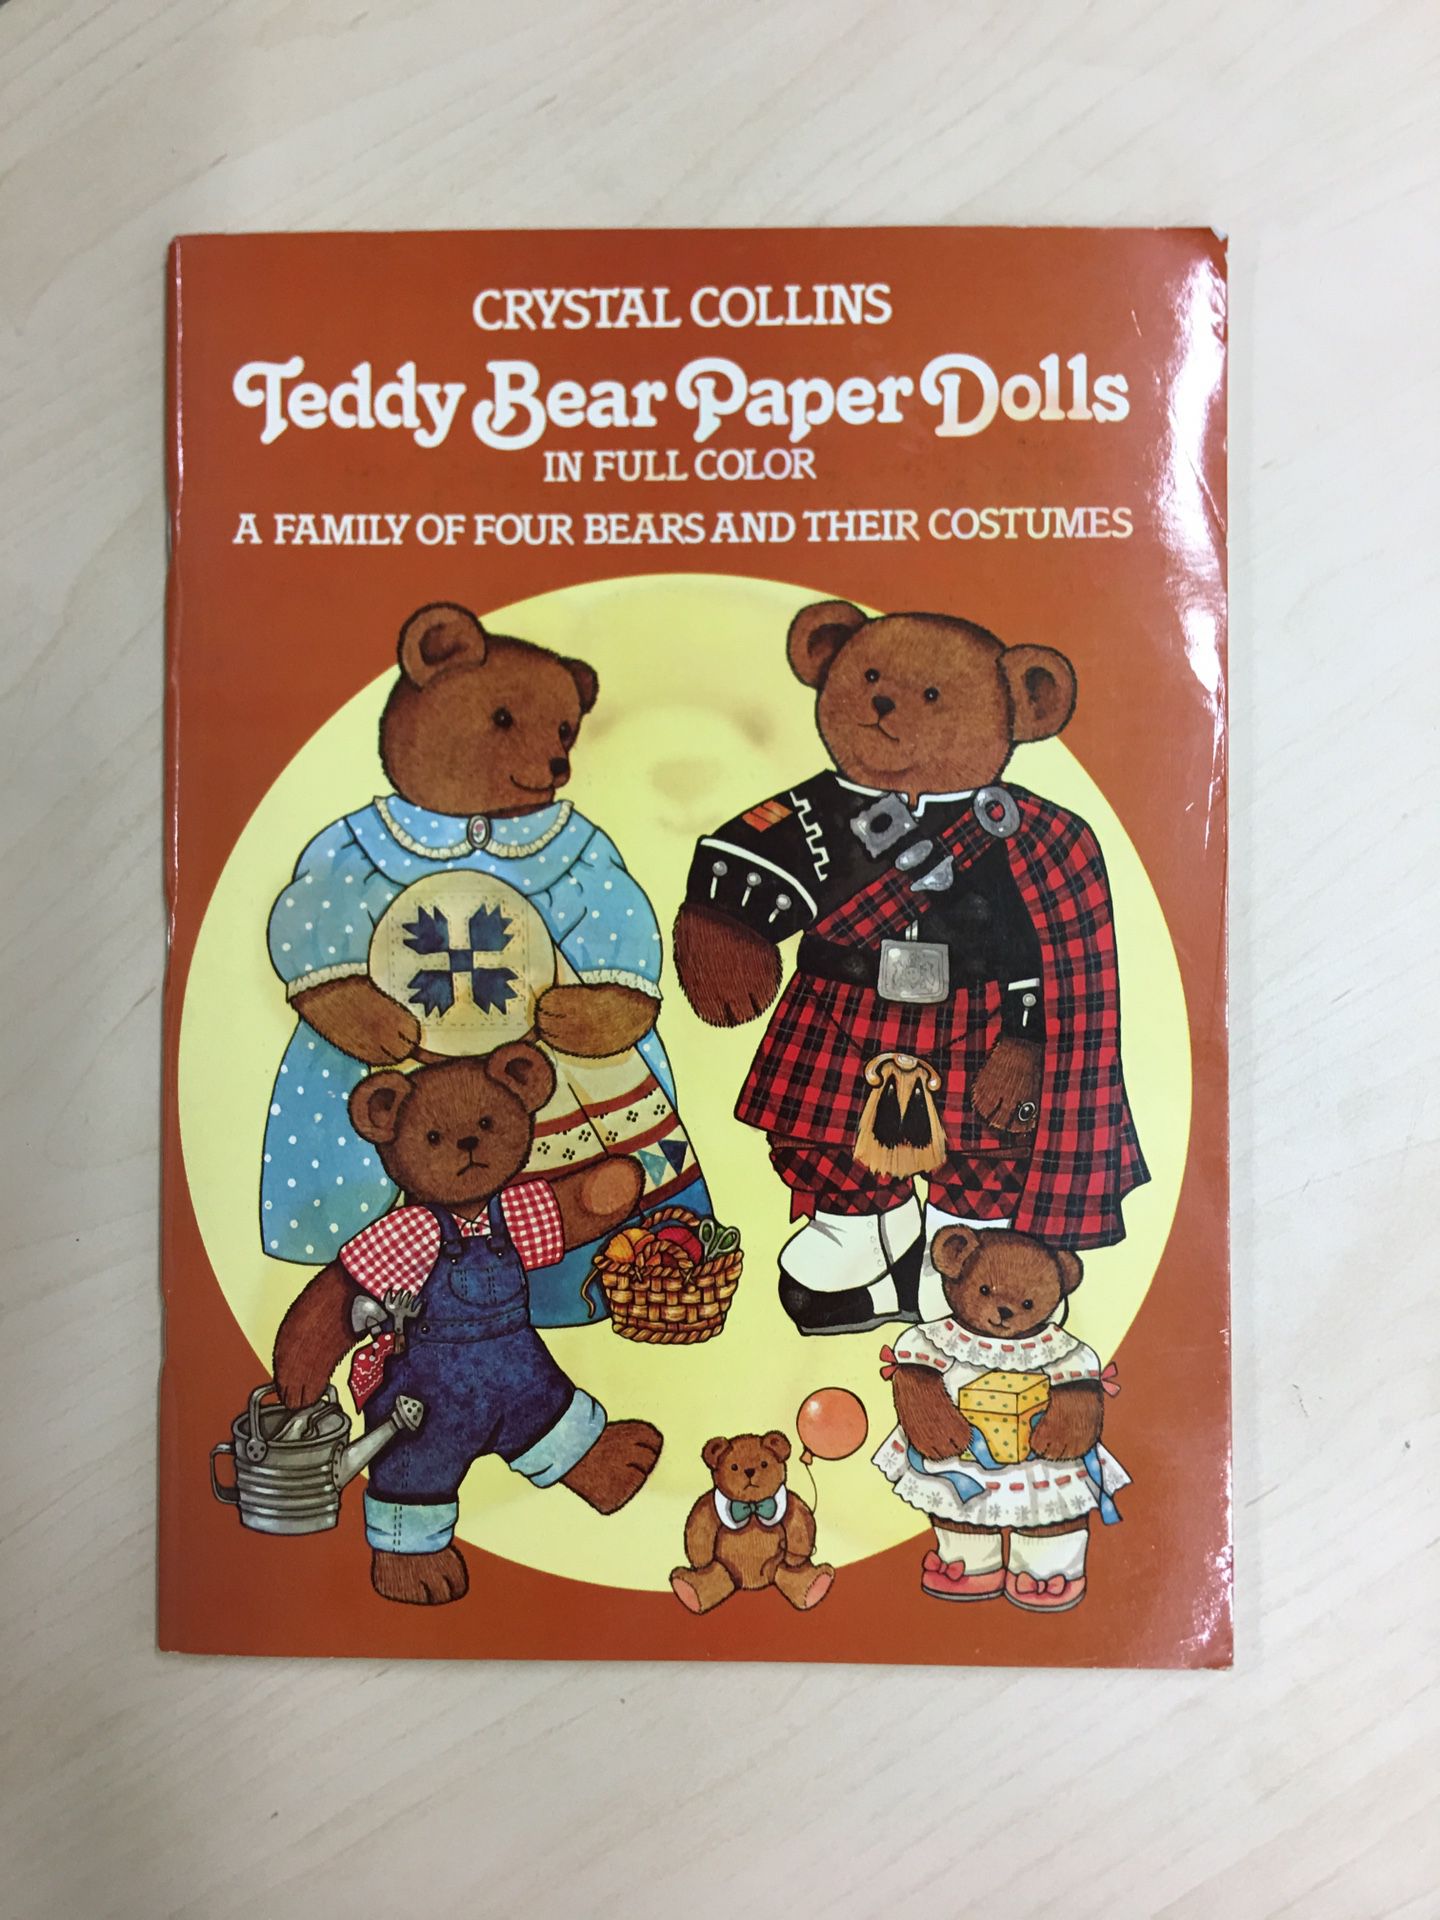 Paper dolls - Teddy Bear - 16 page book